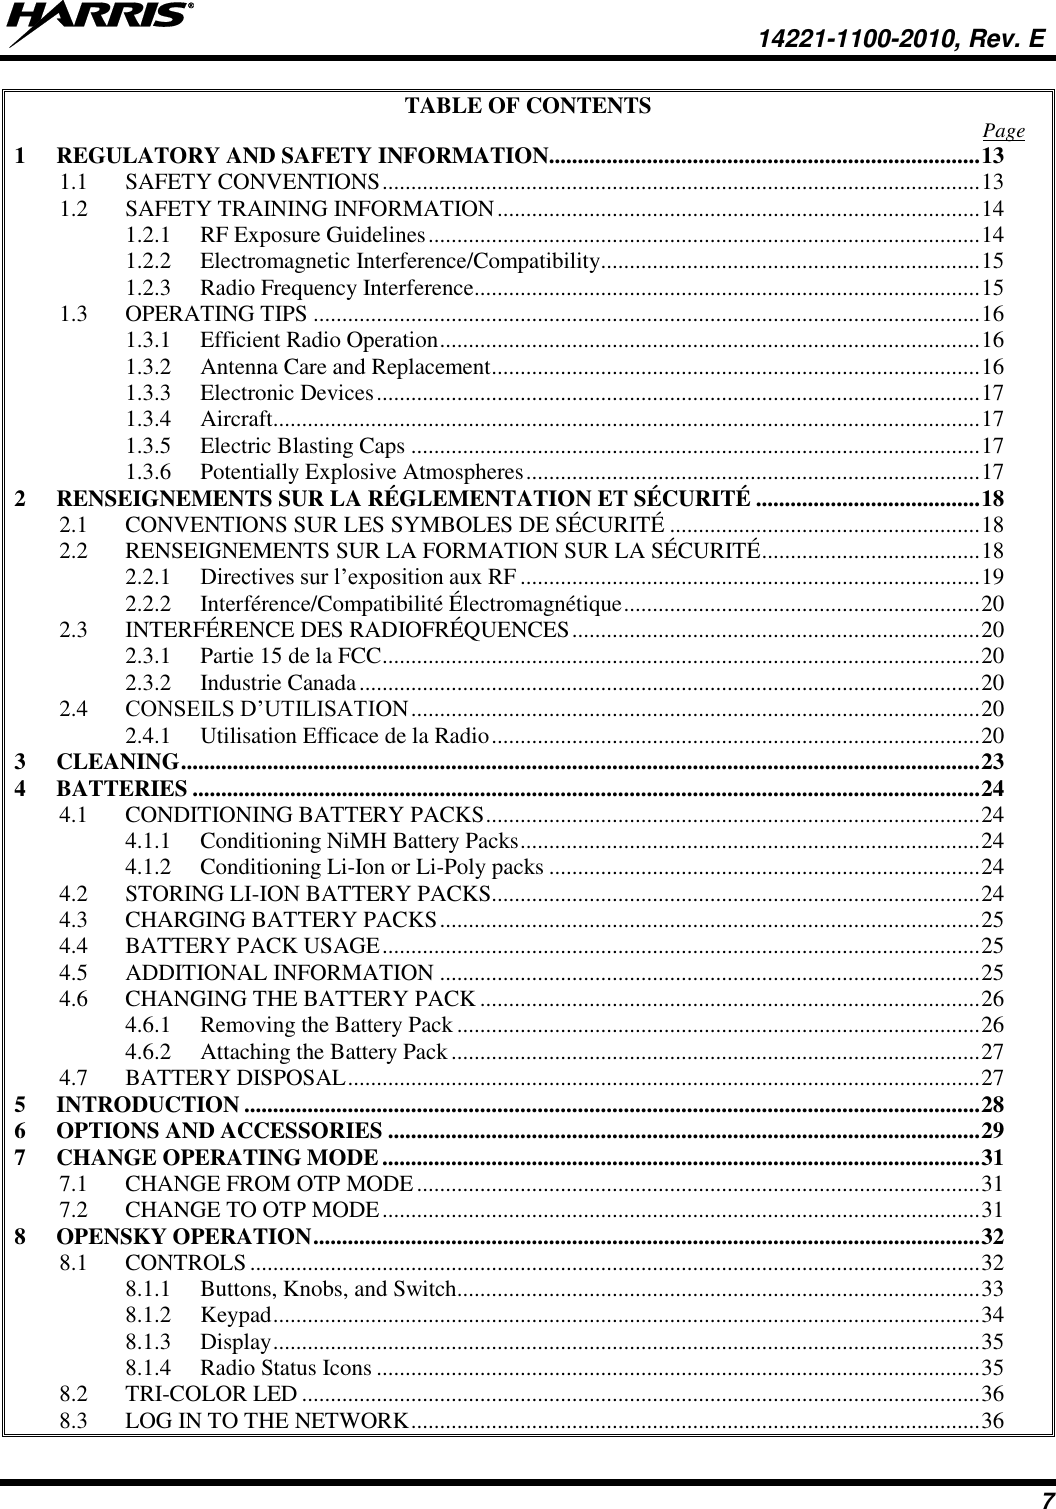   14221-1100-2010, Rev. E 7 TABLE OF CONTENTS  Page 1 REGULATORY AND SAFETY INFORMATION ........................................................................... 13 1.1 SAFETY CONVENTIONS ........................................................................................................ 13 1.2 SAFETY TRAINING INFORMATION .................................................................................... 14 1.2.1 RF Exposure Guidelines ................................................................................................ 14 1.2.2 Electromagnetic Interference/Compatibility.................................................................. 15 1.2.3 Radio Frequency Interference ........................................................................................ 15 1.3 OPERATING TIPS .................................................................................................................... 16 1.3.1 Efficient Radio Operation .............................................................................................. 16 1.3.2 Antenna Care and Replacement ..................................................................................... 16 1.3.3 Electronic Devices ......................................................................................................... 17 1.3.4 Aircraft........................................................................................................................... 17 1.3.5 Electric Blasting Caps ................................................................................................... 17 1.3.6 Potentially Explosive Atmospheres ............................................................................... 17 2 RENSEIGNEMENTS SUR LA RÉGLEMENTATION ET SÉCURITÉ ....................................... 18 2.1 CONVENTIONS SUR LES SYMBOLES DE SÉCURITÉ ...................................................... 18 2.2 RENSEIGNEMENTS SUR LA FORMATION SUR LA SÉCURITÉ ...................................... 18 2.2.1 Directives sur l’exposition aux RF ................................................................................ 19 2.2.2 Interférence/Compatibilité Électromagnétique .............................................................. 20 2.3 INTERFÉRENCE DES RADIOFRÉQUENCES ....................................................................... 20 2.3.1 Partie 15 de la FCC ........................................................................................................ 20 2.3.2 Industrie Canada ............................................................................................................ 20 2.4 CONSEILS D’UTILISATION ................................................................................................... 20 2.4.1 Utilisation Efficace de la Radio ..................................................................................... 20 3 CLEANING ........................................................................................................................................... 23 4 BATTERIES ......................................................................................................................................... 24 4.1 CONDITIONING BATTERY PACKS ...................................................................................... 24 4.1.1 Conditioning NiMH Battery Packs ................................................................................ 24 4.1.2 Conditioning Li-Ion or Li-Poly packs ........................................................................... 24 4.2 STORING LI-ION BATTERY PACKS..................................................................................... 24 4.3 CHARGING BATTERY PACKS .............................................................................................. 25 4.4 BATTERY PACK USAGE ........................................................................................................ 25 4.5 ADDITIONAL INFORMATION .............................................................................................. 25 4.6 CHANGING THE BATTERY PACK ....................................................................................... 26 4.6.1 Removing the Battery Pack ........................................................................................... 26 4.6.2 Attaching the Battery Pack ............................................................................................ 27 4.7 BATTERY DISPOSAL .............................................................................................................. 27 5 INTRODUCTION ................................................................................................................................ 28 6 OPTIONS AND ACCESSORIES ....................................................................................................... 29 7 CHANGE OPERATING MODE ........................................................................................................ 31 7.1 CHANGE FROM OTP MODE .................................................................................................. 31 7.2 CHANGE TO OTP MODE ........................................................................................................ 31 8 OPENSKY OPERATION .................................................................................................................... 32 8.1 CONTROLS ............................................................................................................................... 32 8.1.1 Buttons, Knobs, and Switch........................................................................................... 33 8.1.2 Keypad ........................................................................................................................... 34 8.1.3 Display ........................................................................................................................... 35 8.1.4 Radio Status Icons ......................................................................................................... 35 8.2 TRI-COLOR LED ...................................................................................................................... 36 8.3 LOG IN TO THE NETWORK ................................................................................................... 36 